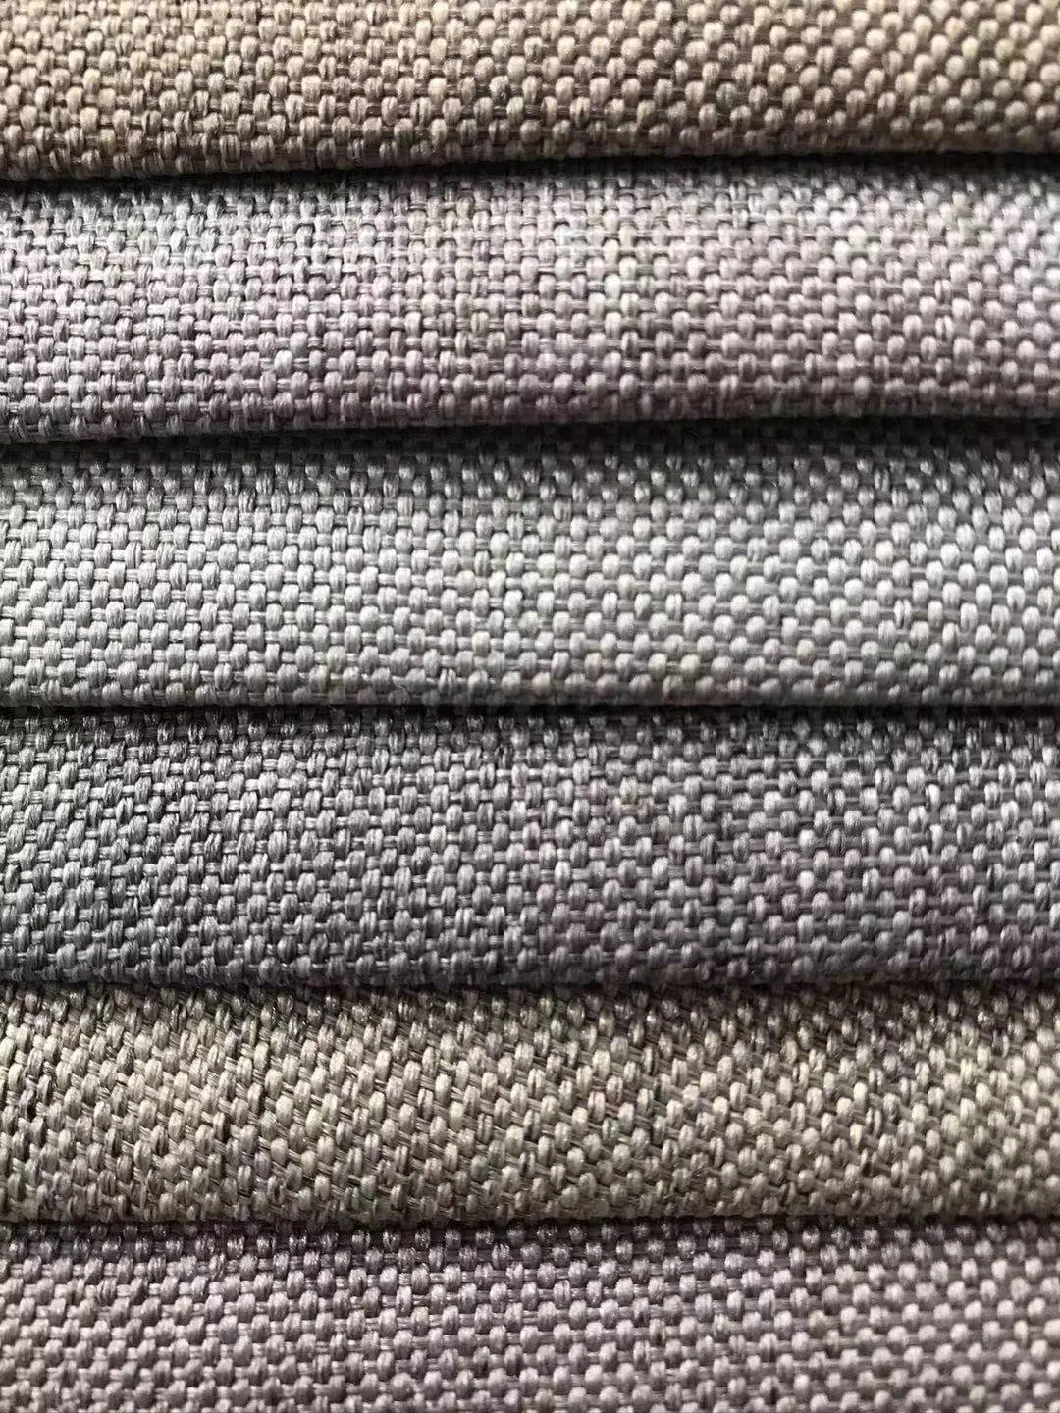 100% Polyester Sofa Fabric Upholstery Linen Look Fabric for Seat Cover